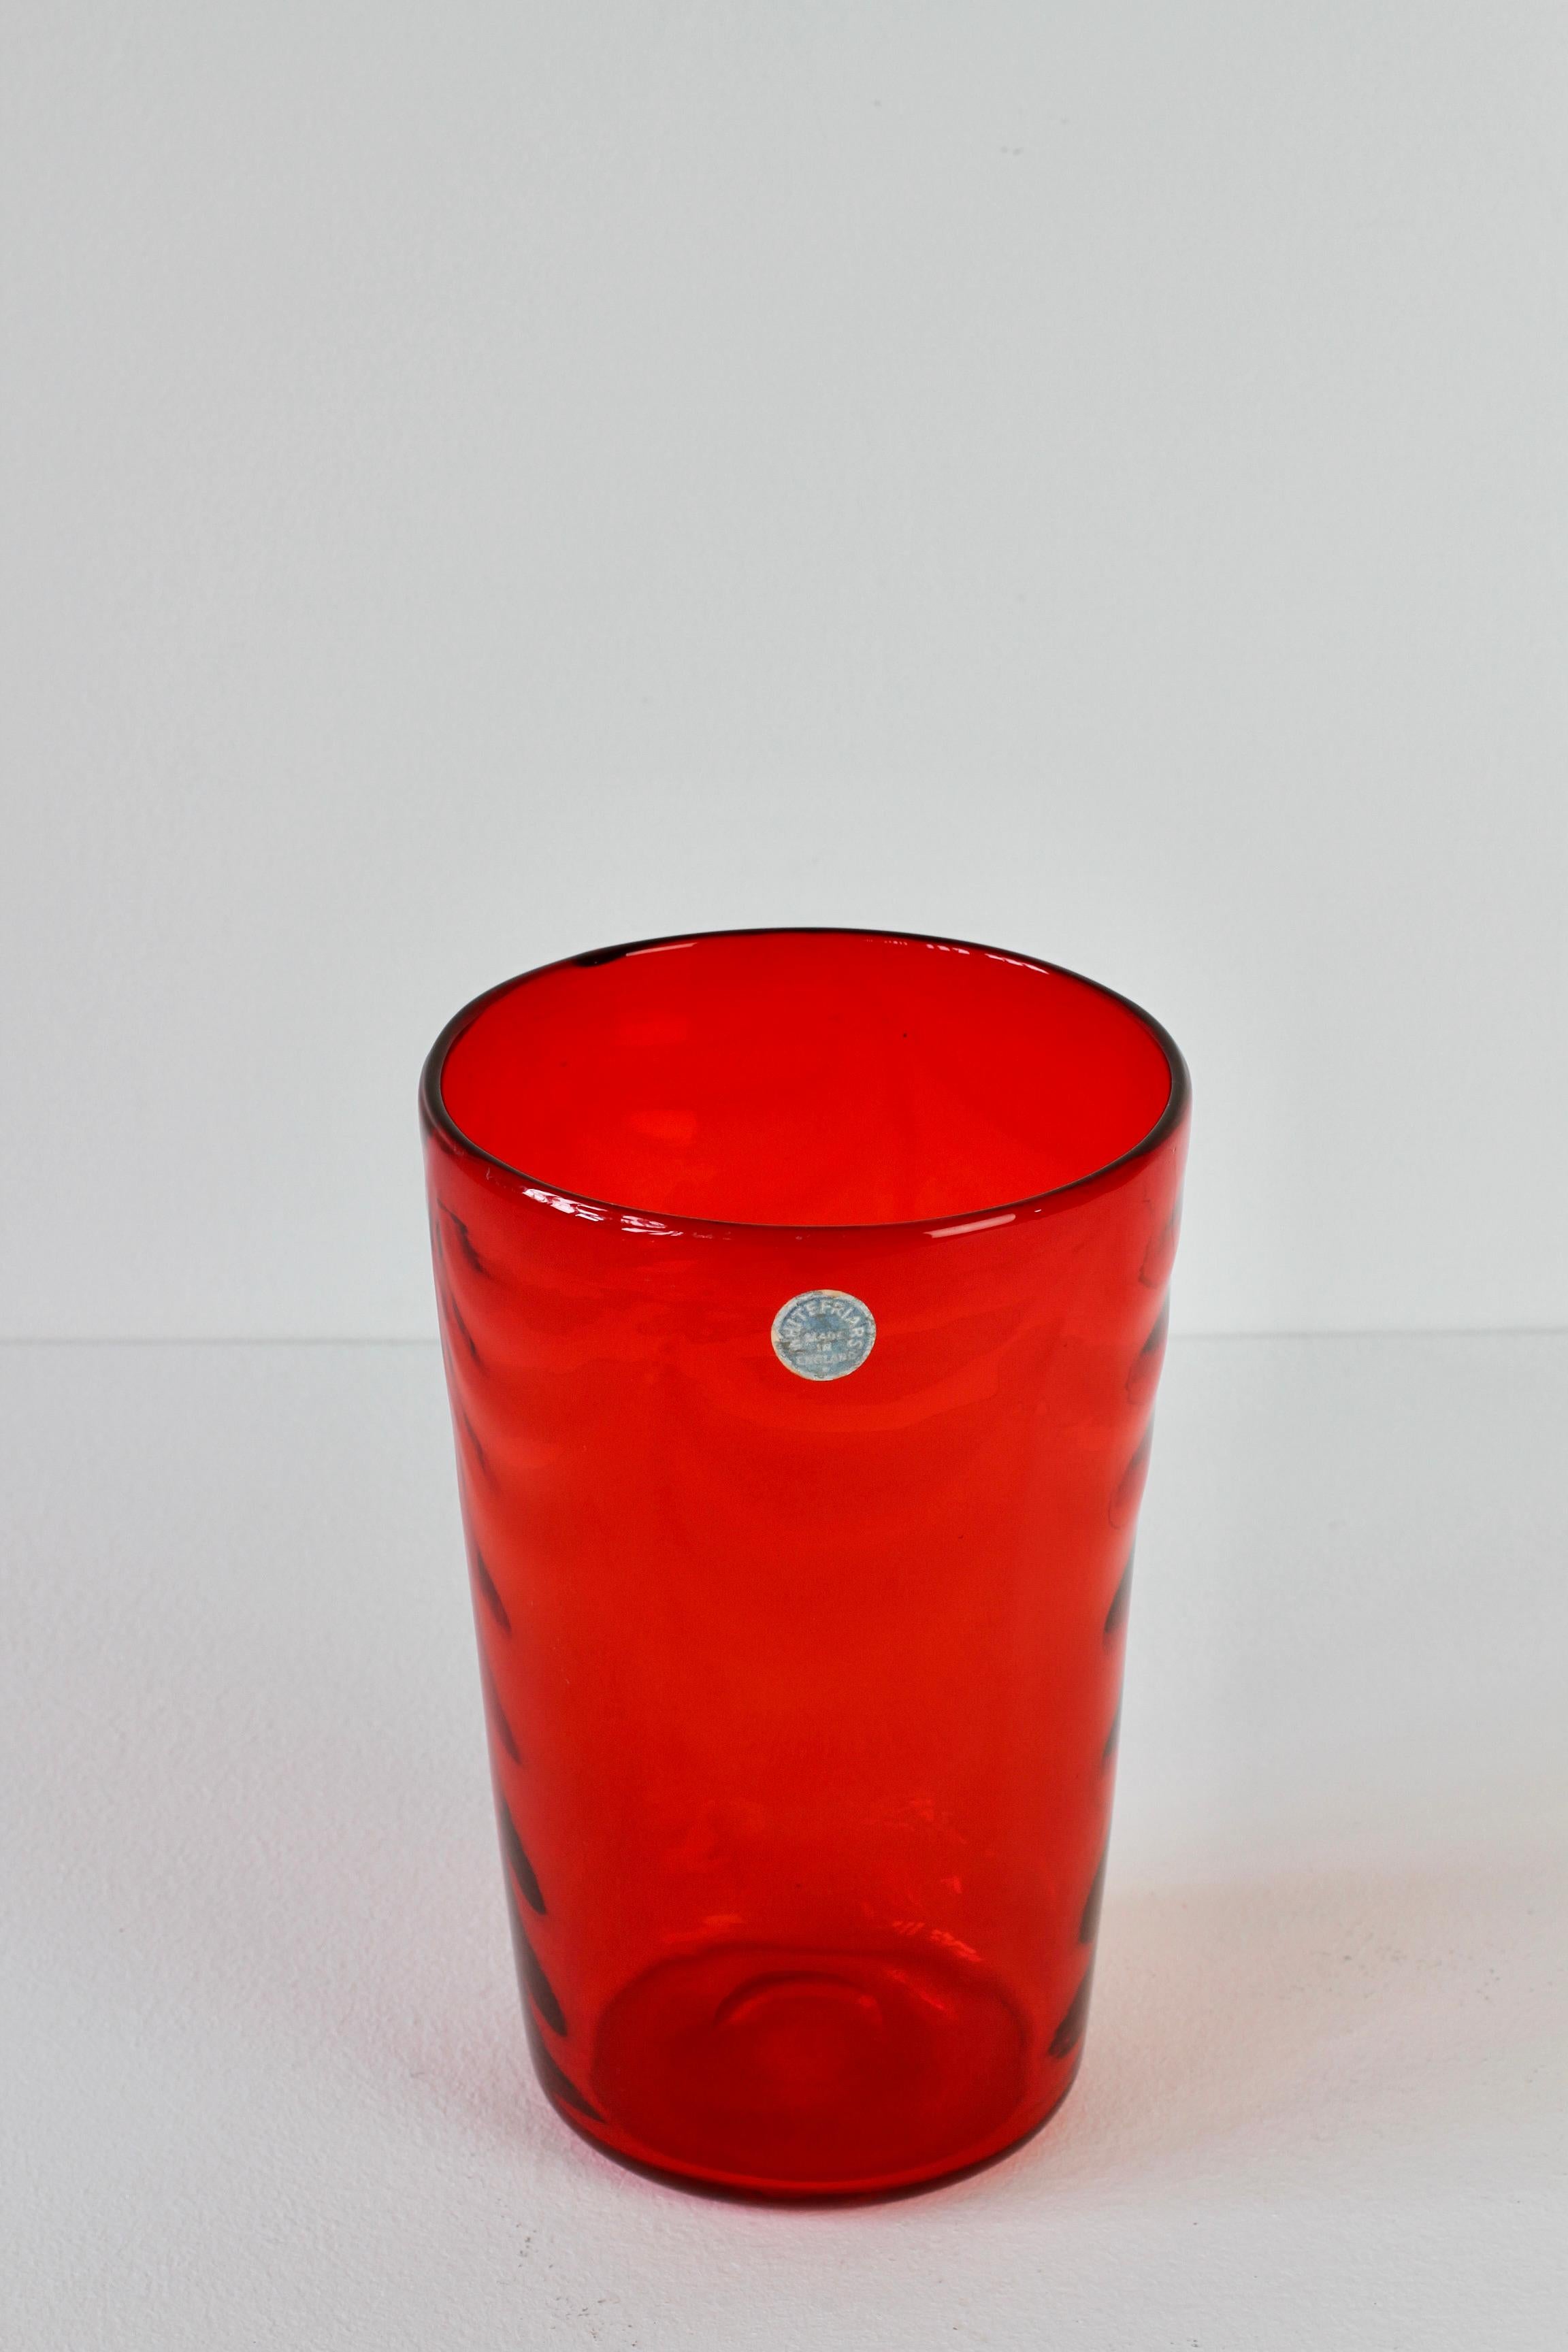 Whitefriars Vintage Vibrant Red Glass Vase by Barnaby Marriott Powel, C. 1940 For Sale 5